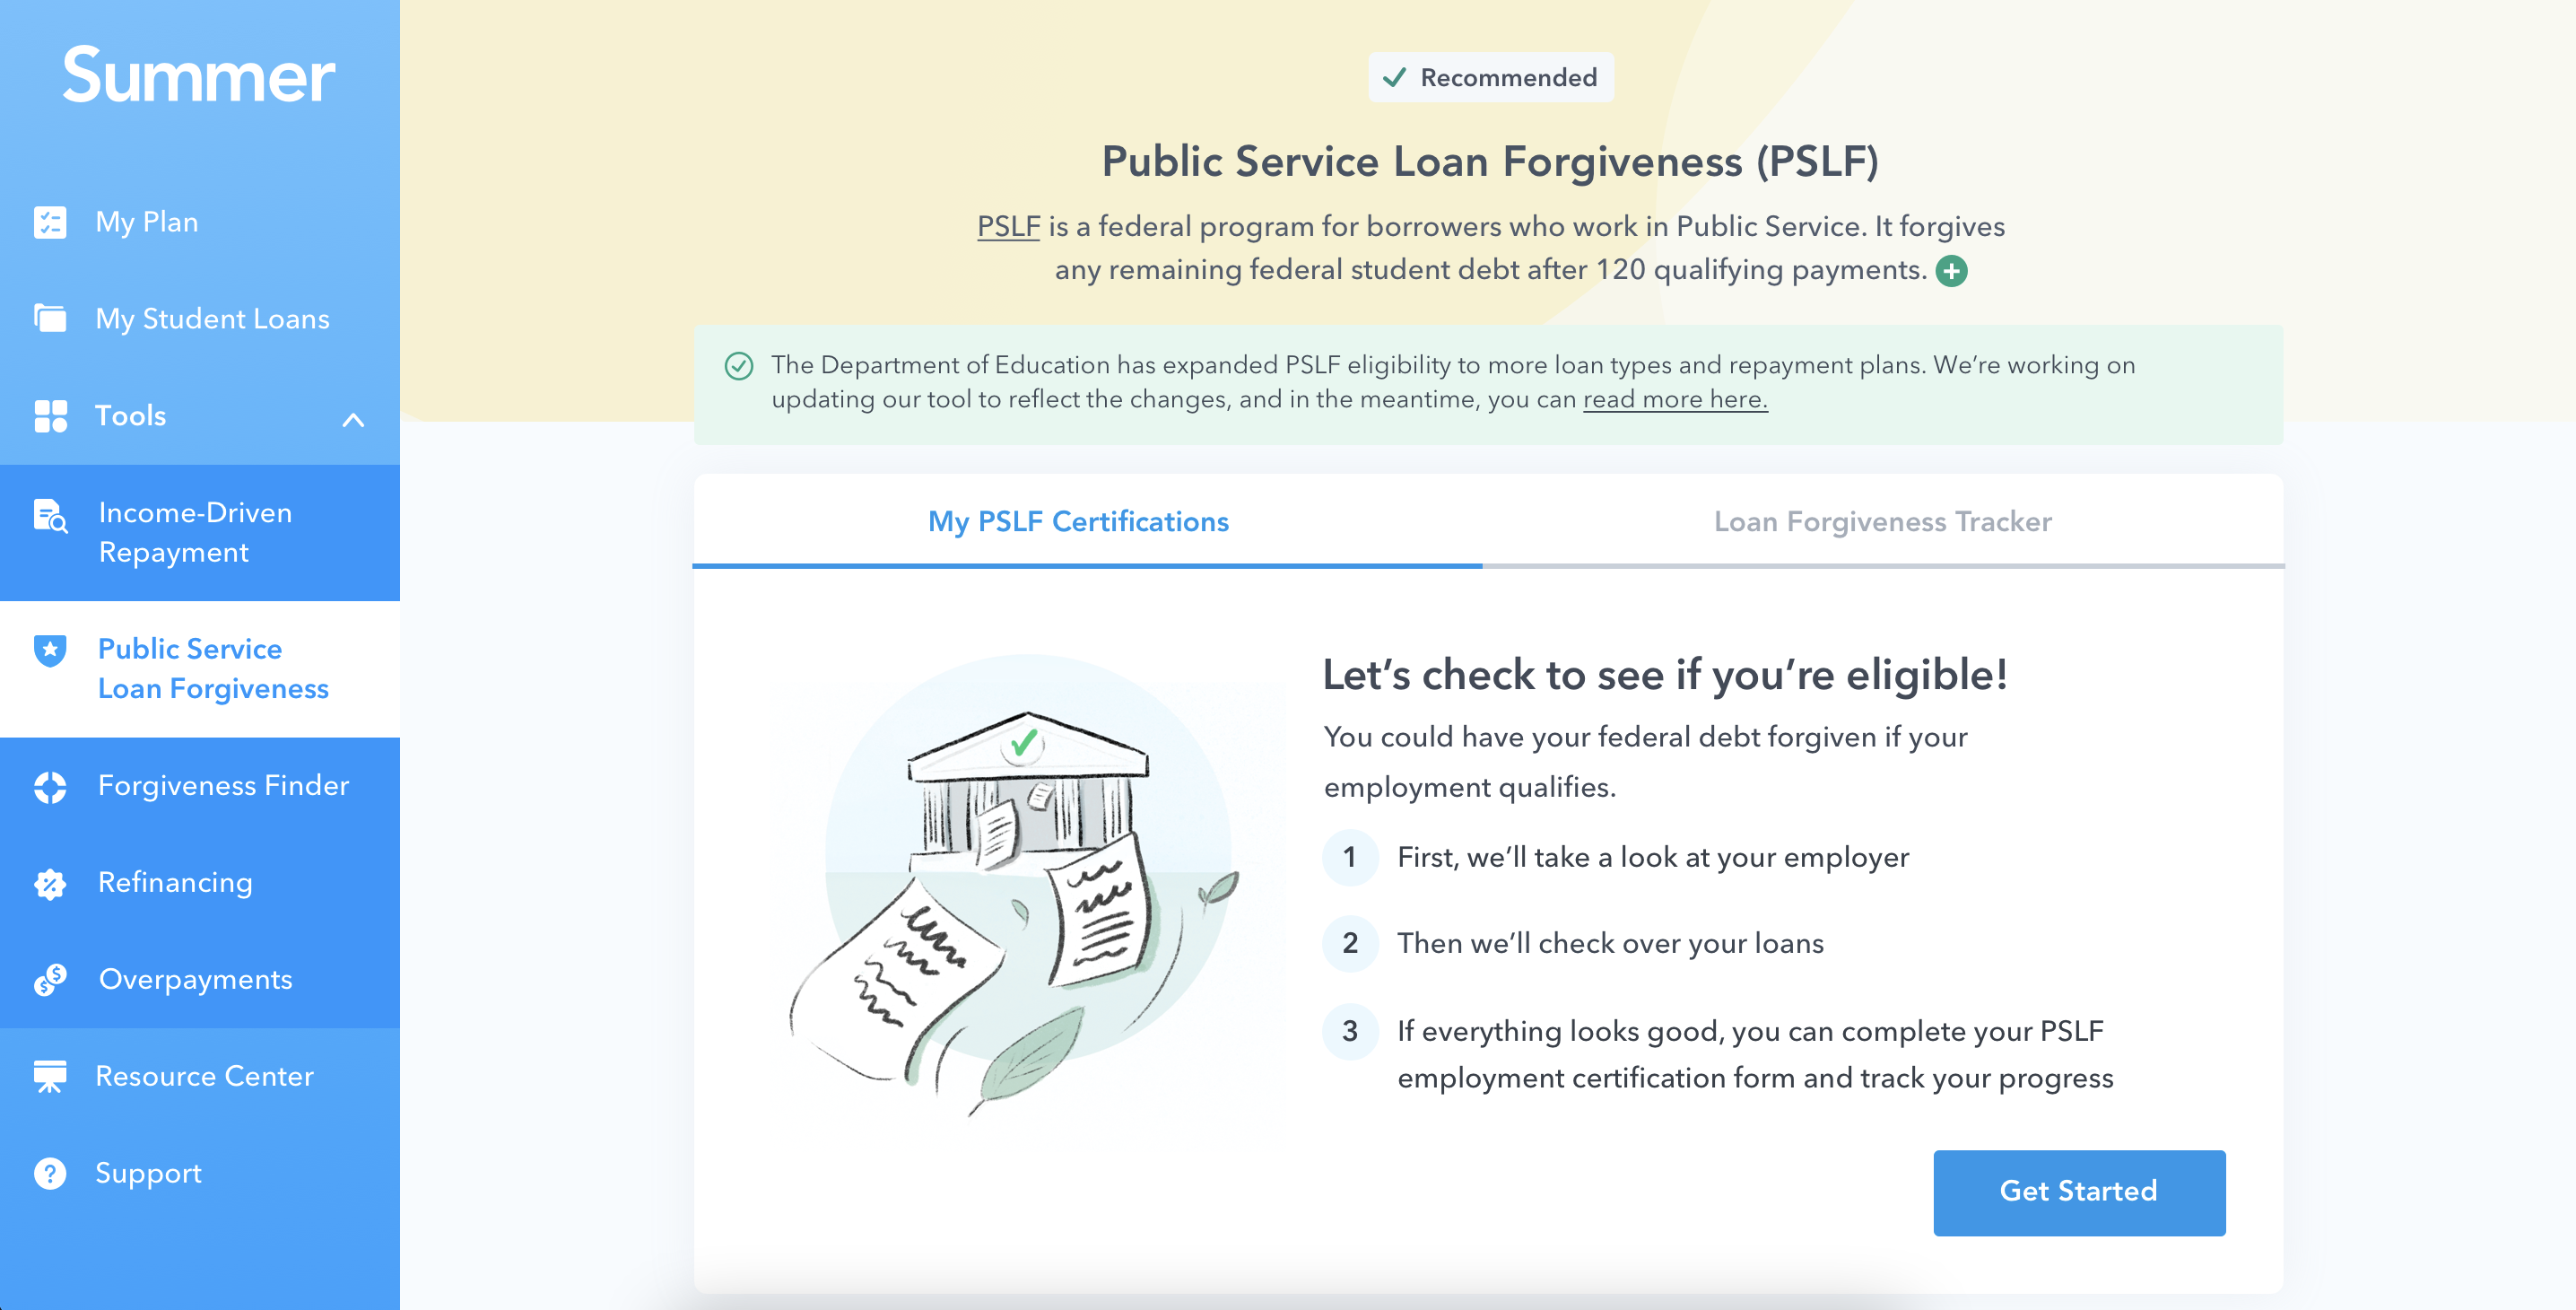 Screen grab showing the home page for the PSLF certifications. 
The interface is broken down into simple steps and easy to navigate tabs. 